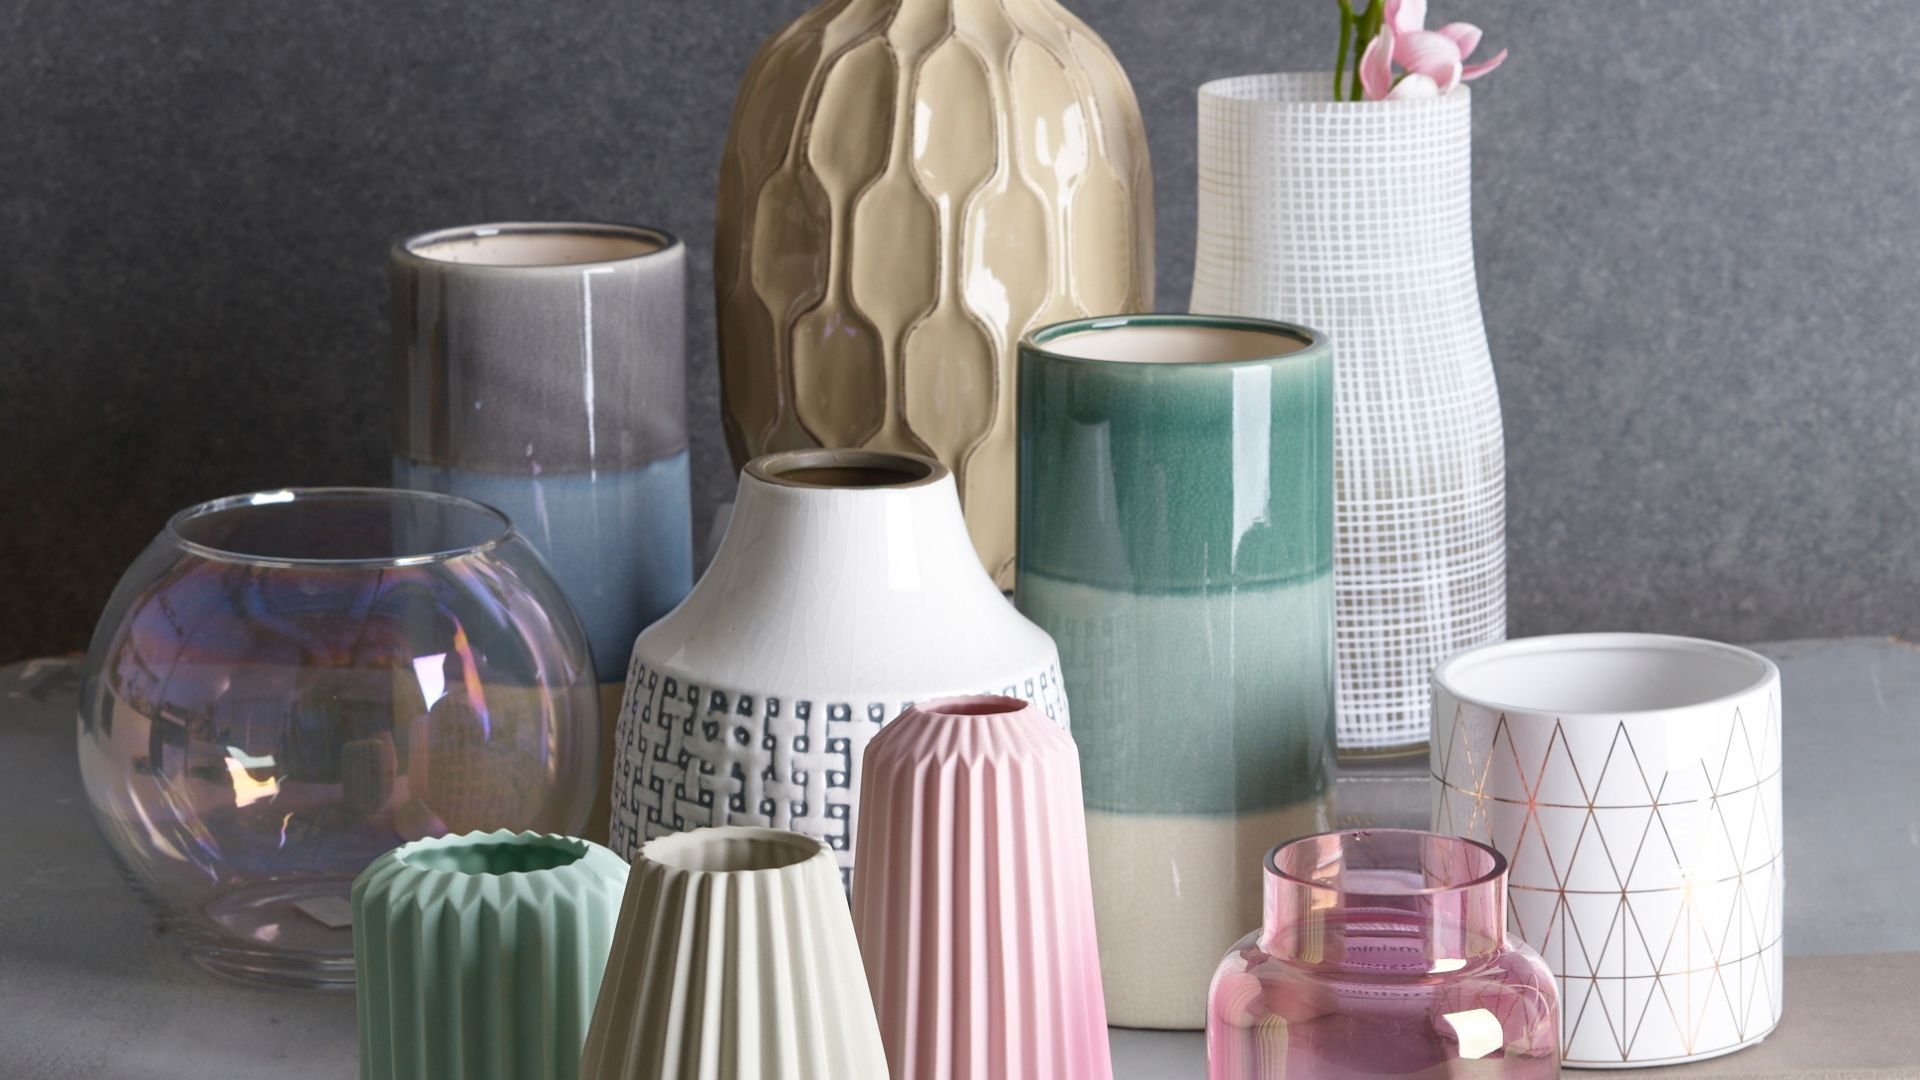 5 Creative Ways To Style Vases in Your Home